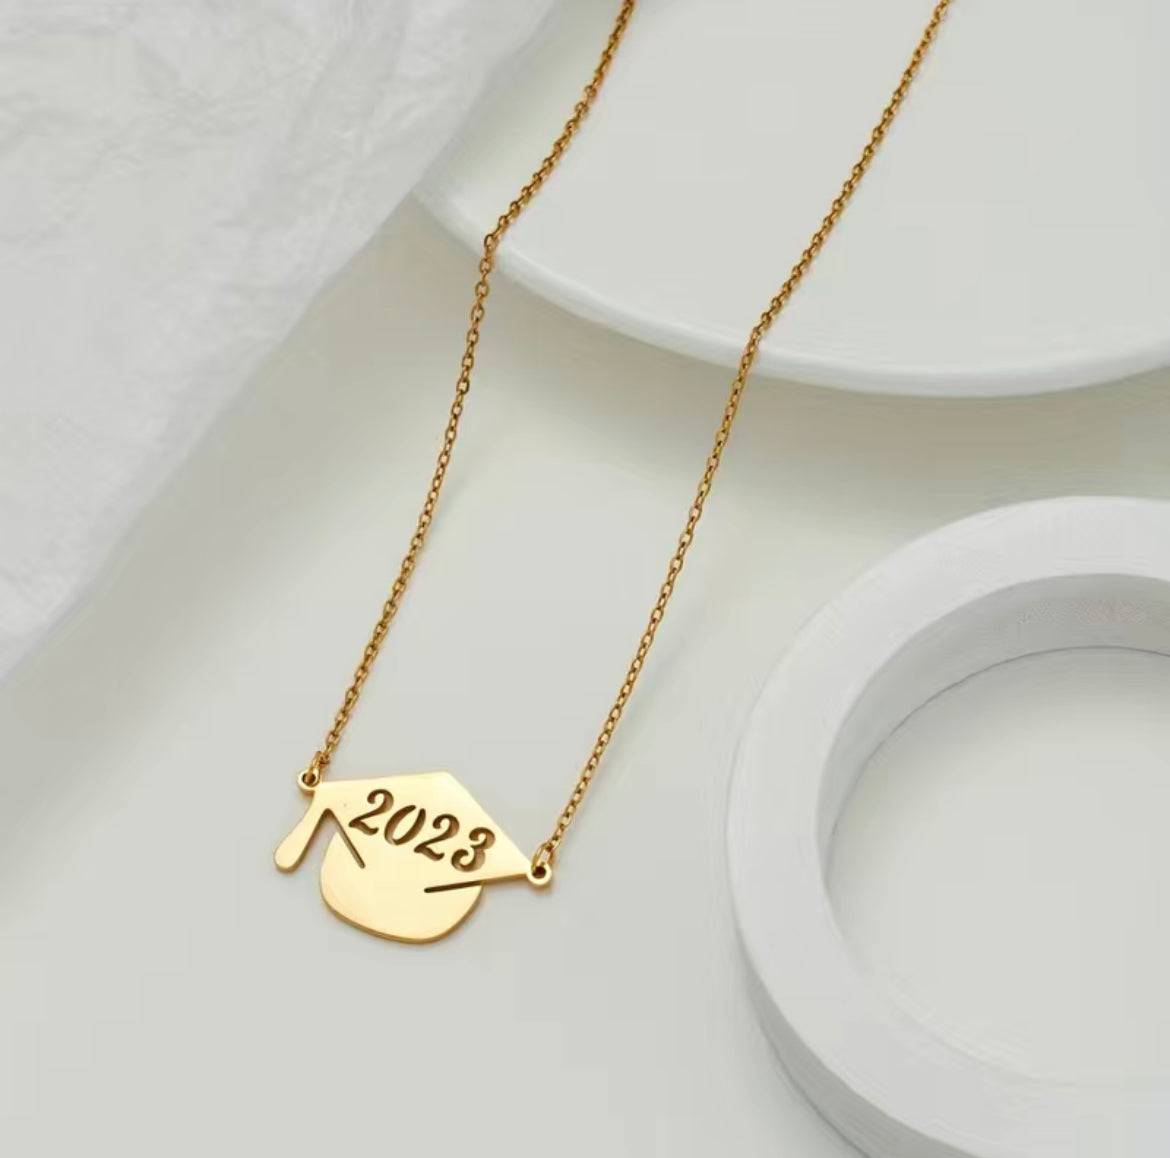 Class of 2023 necklace